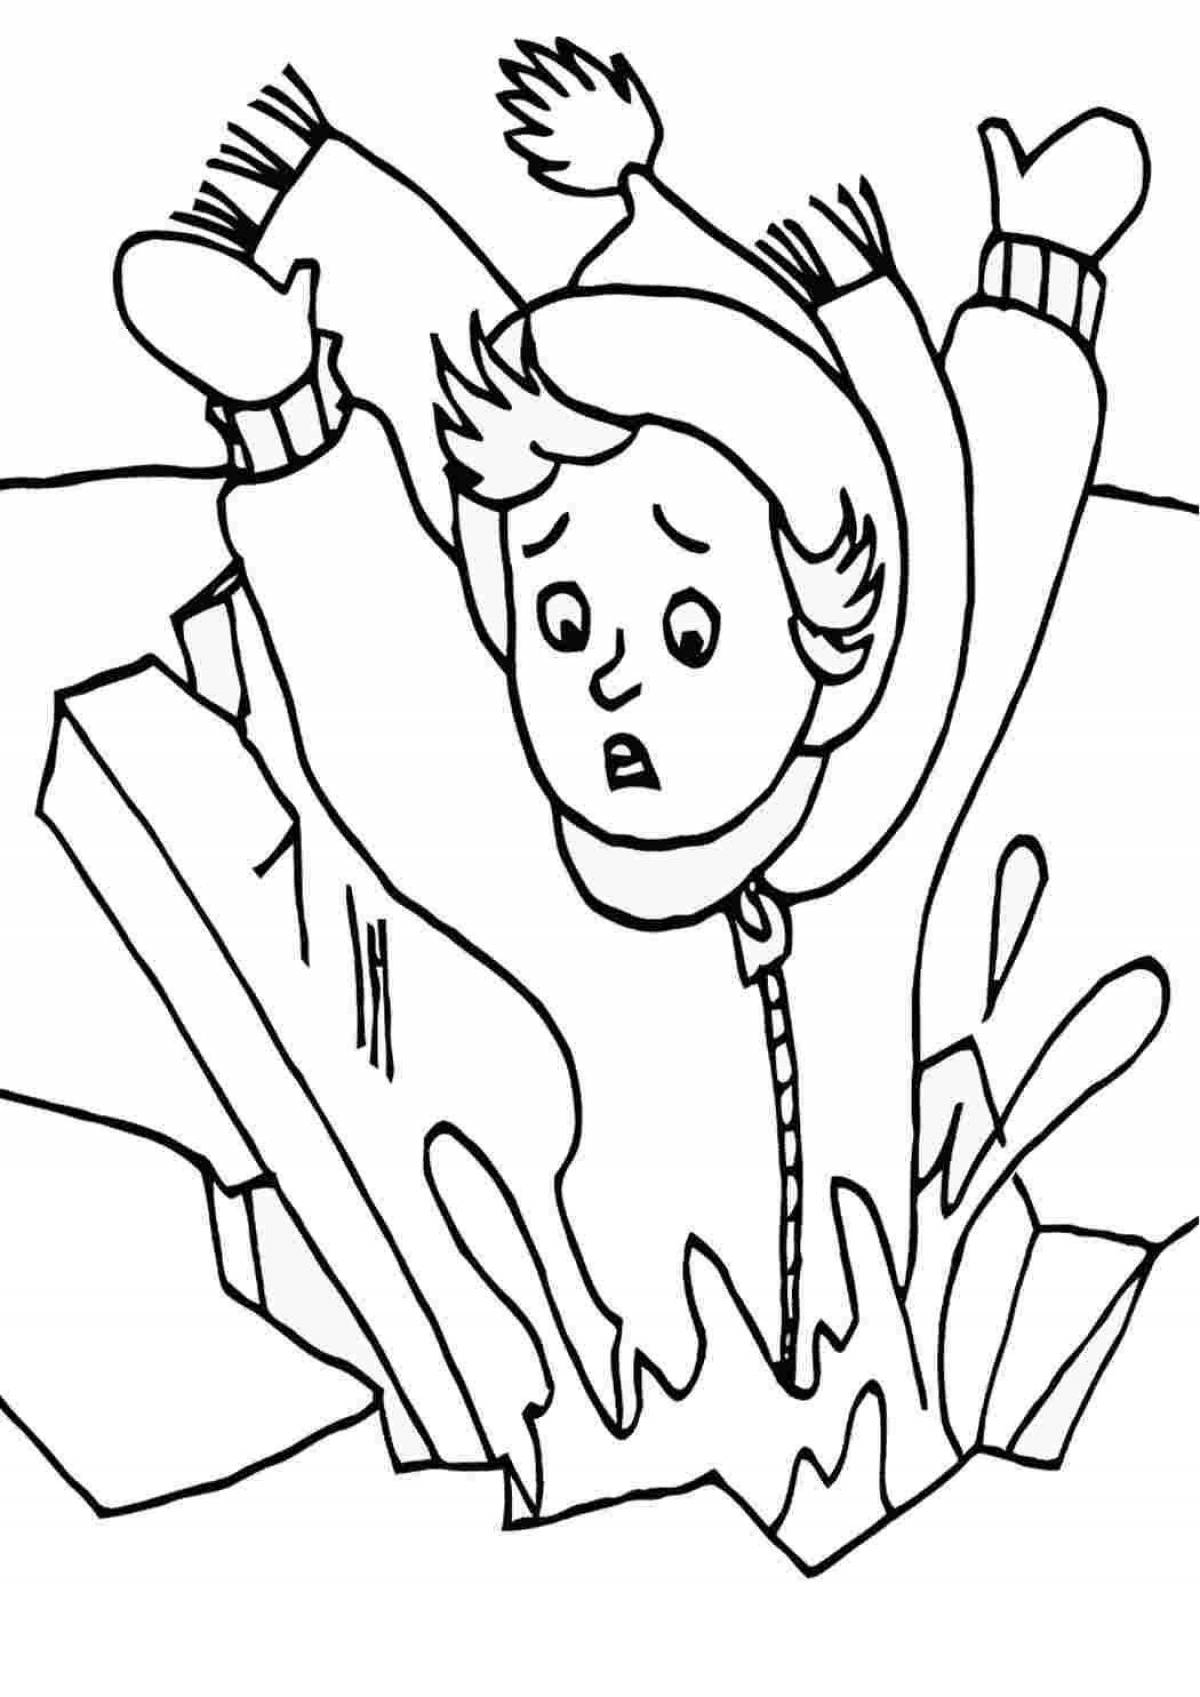 Colorful winter safety coloring page for preschoolers